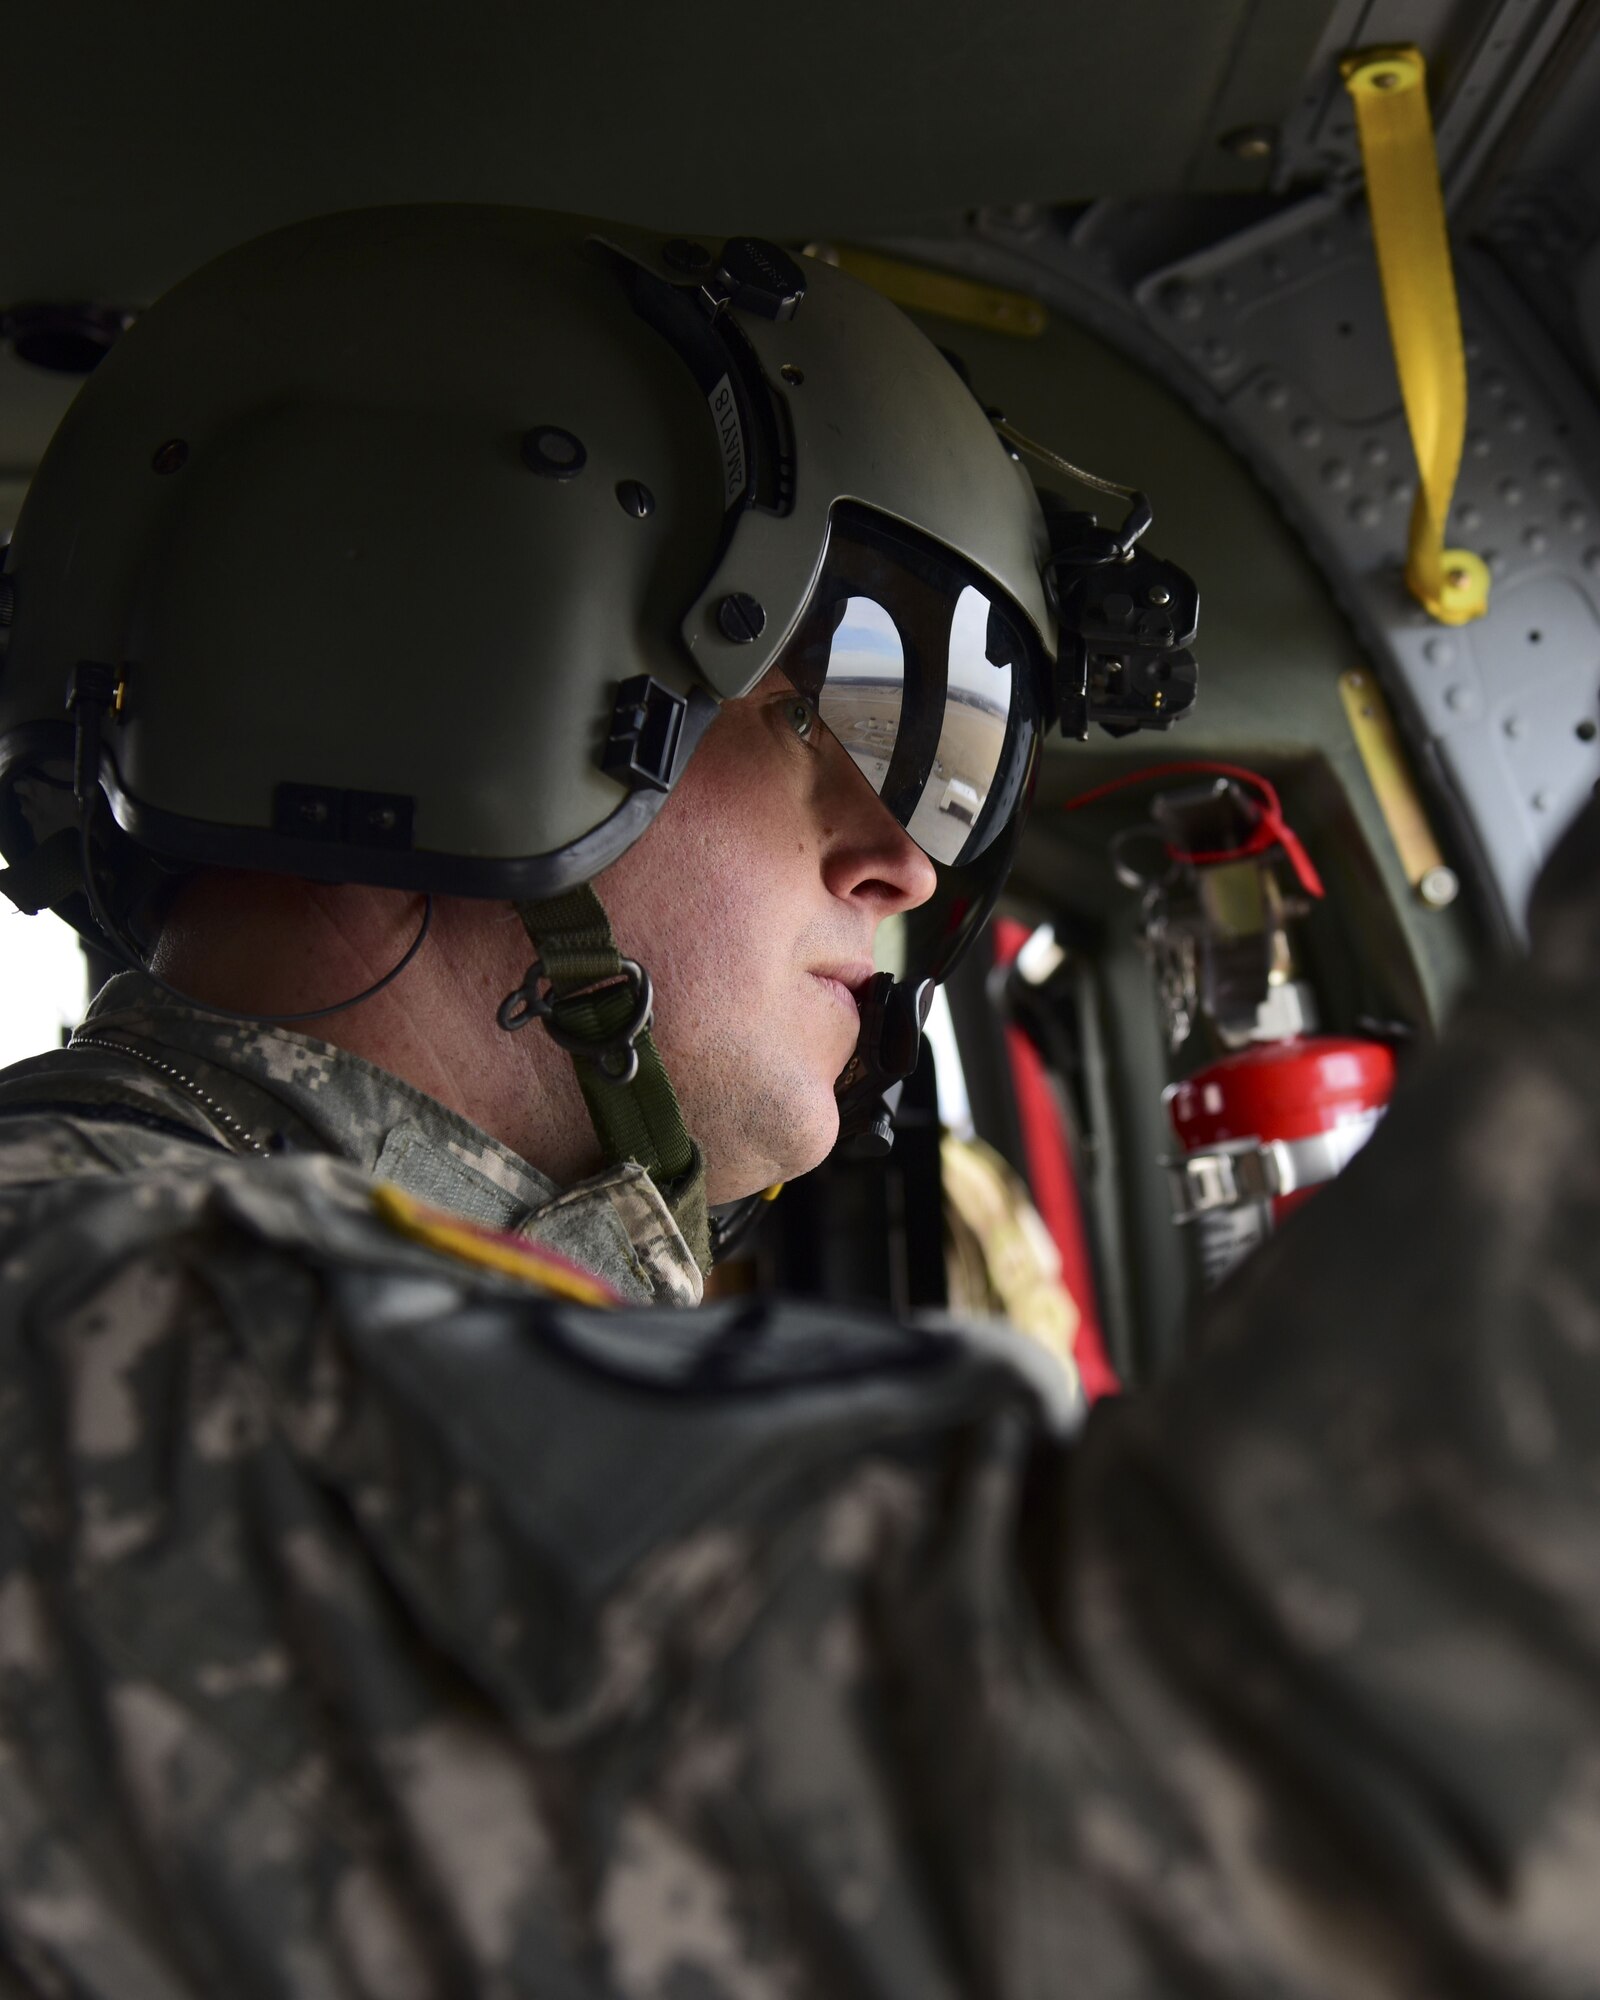 A U.S. Army crew chief with the 1-135th Assault Helicopter Battalion looks out a window of a UH-60 Black Hawk during a joint training mission at Whiteman Air Force Base, Mo., Jan. 31, 2018. In addition to establishing a partnership, the purpose of the training was to familiarize Joint Terminal Attack Controllers from the 7th Air Support Operations Squadron, located in Fort Bliss, Texas, with the assets available at Whiteman AFB that are used in a multi-domain fight. (U.S. Air Force photo by Staff Sgt. Danielle Quilla)